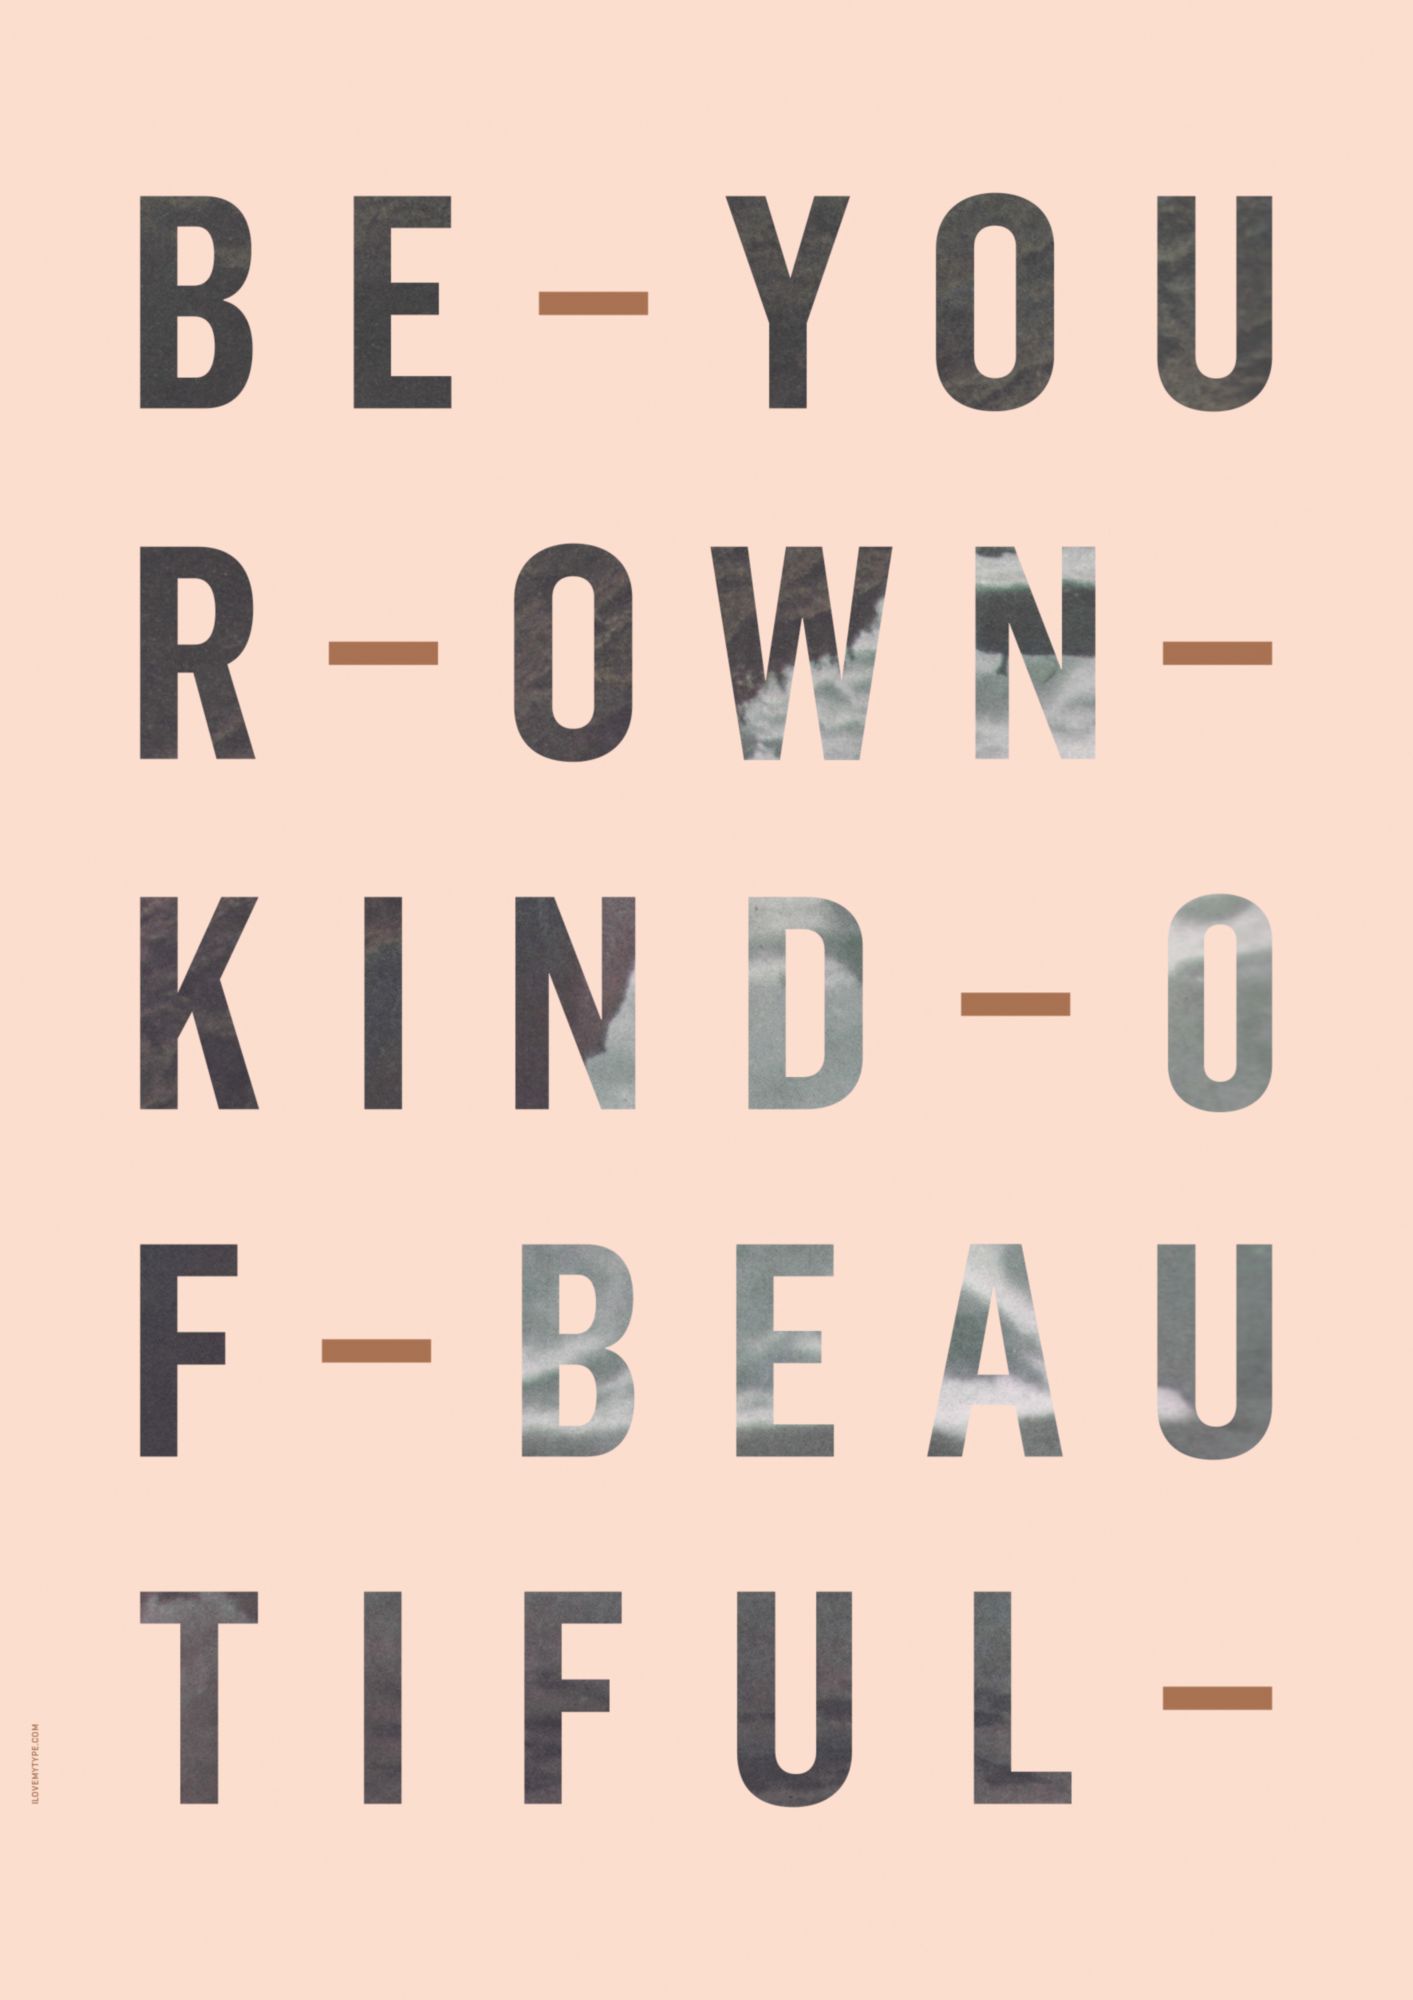 BE YOUR OWN KIND - ROSE-A3